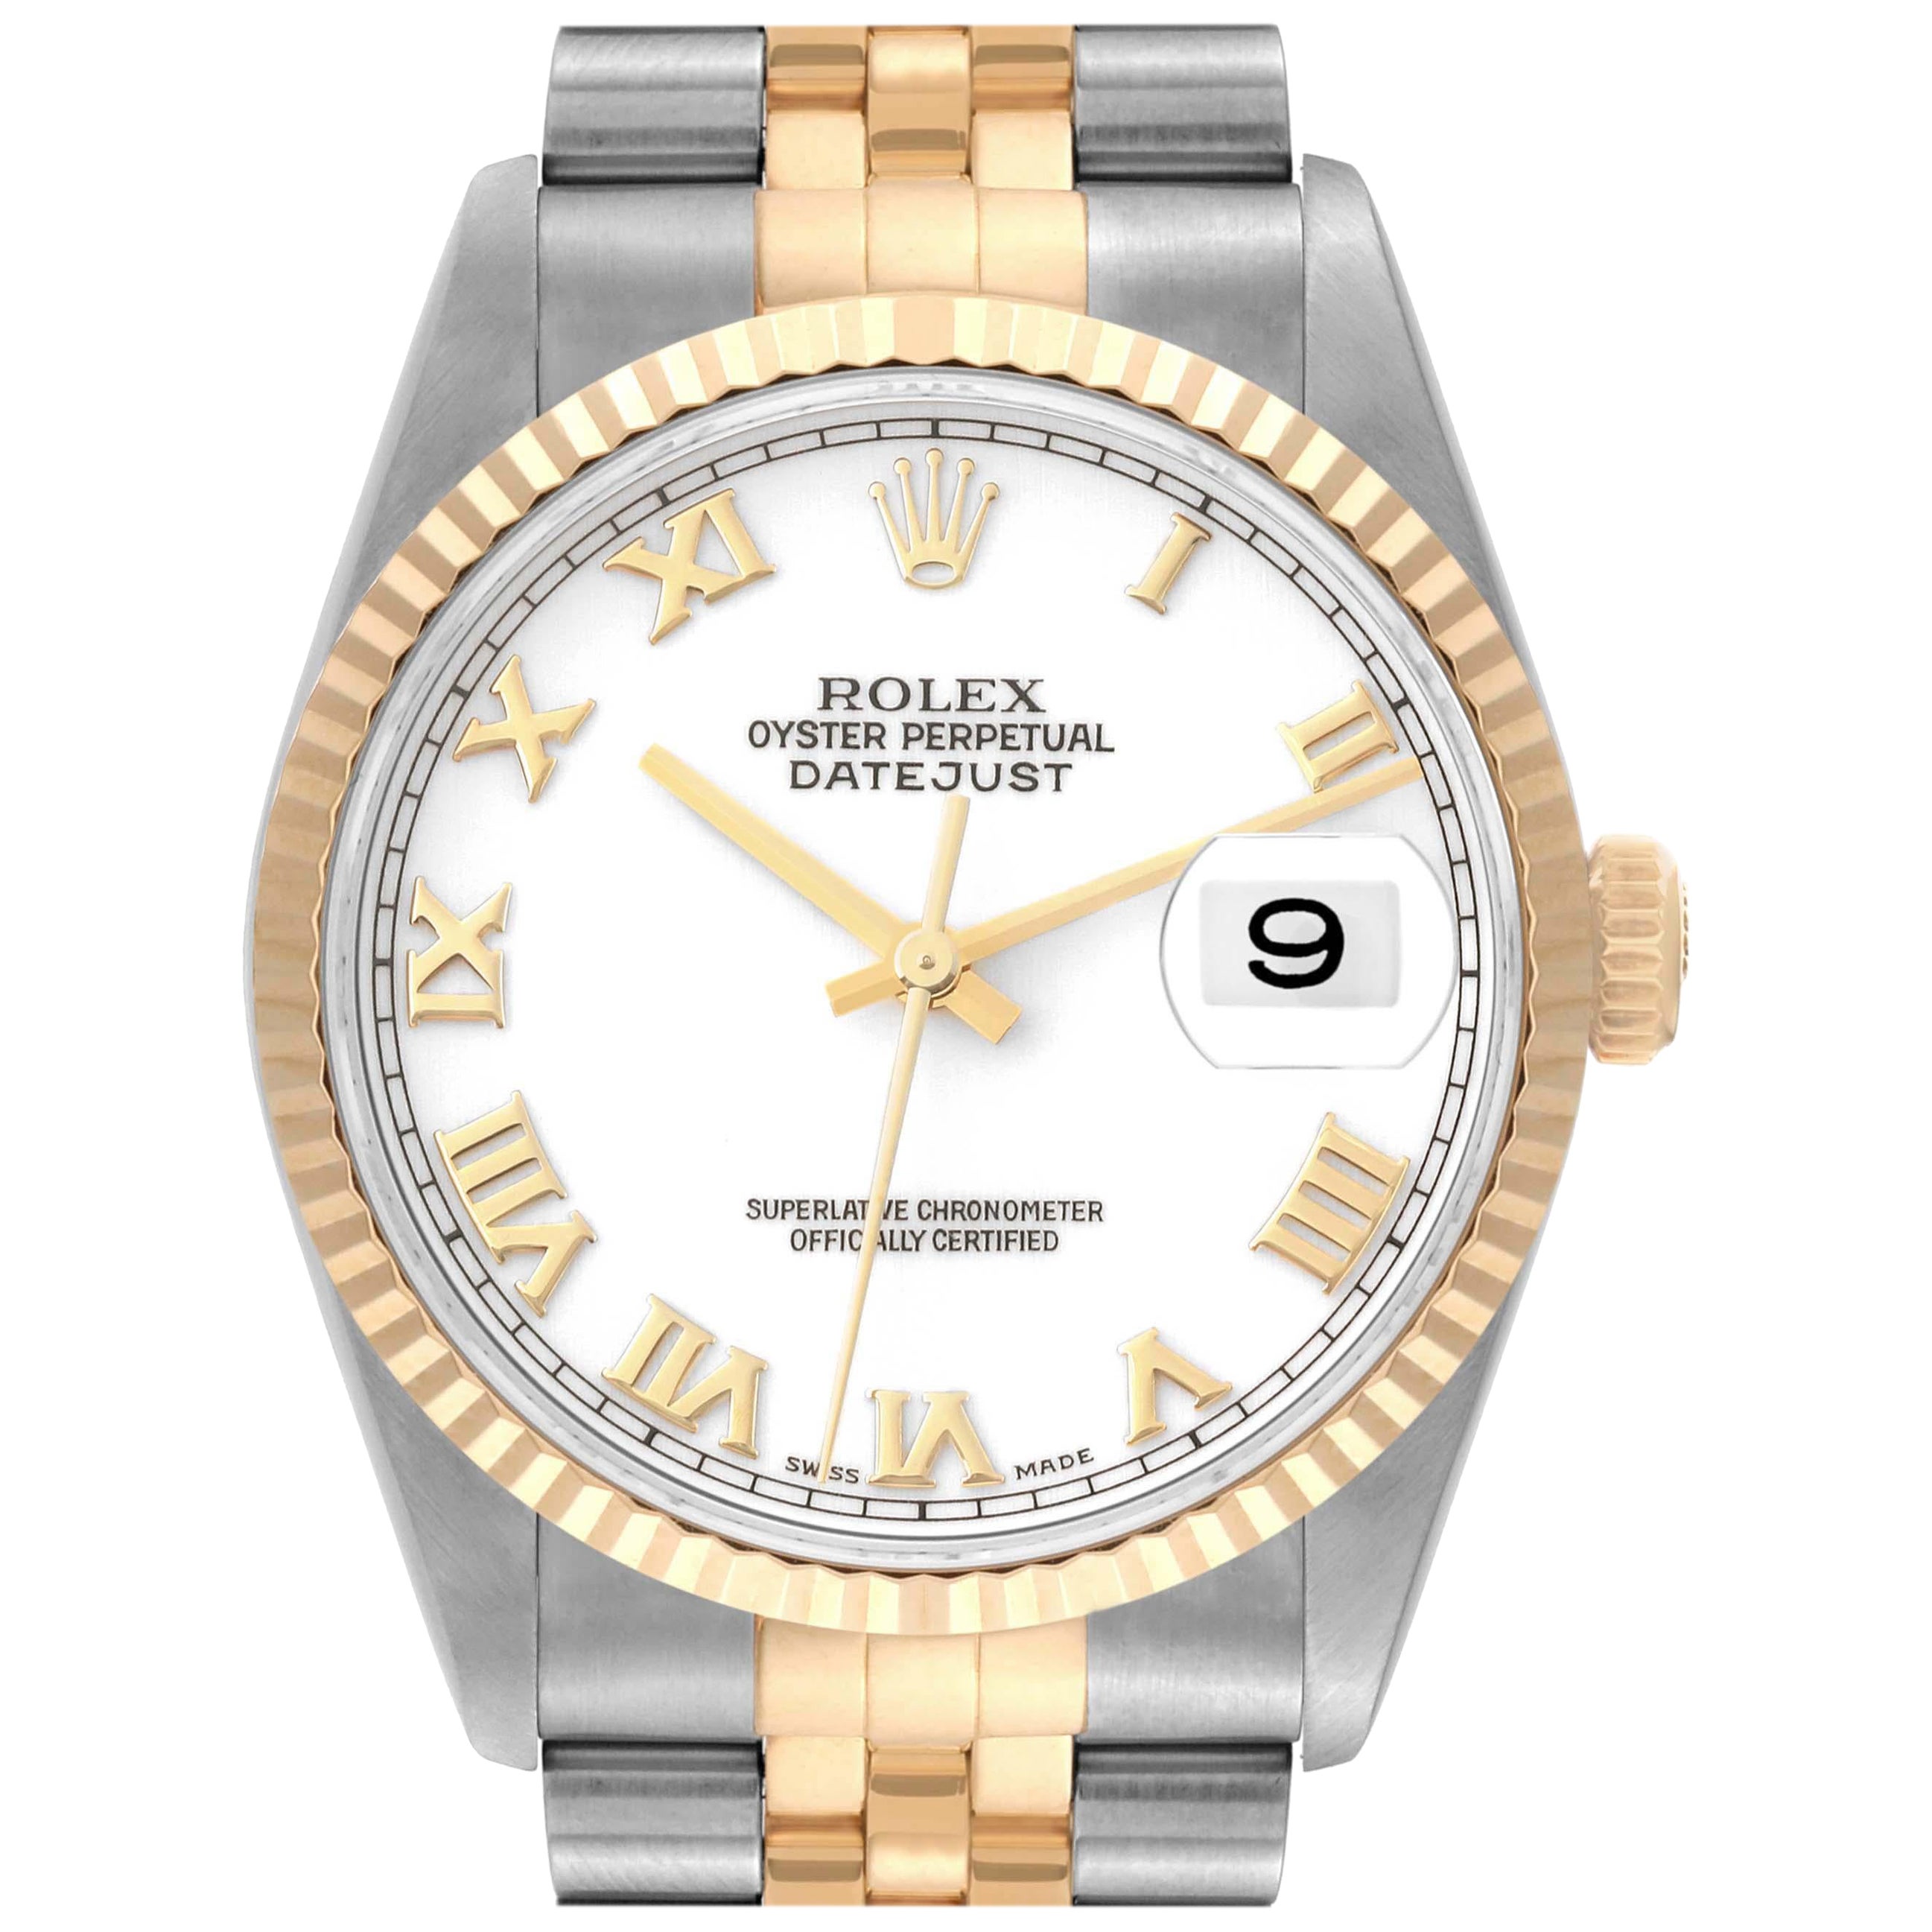 Rolex Datejust Steel Yellow Gold White Dial Mens Watch 16233 For Sale